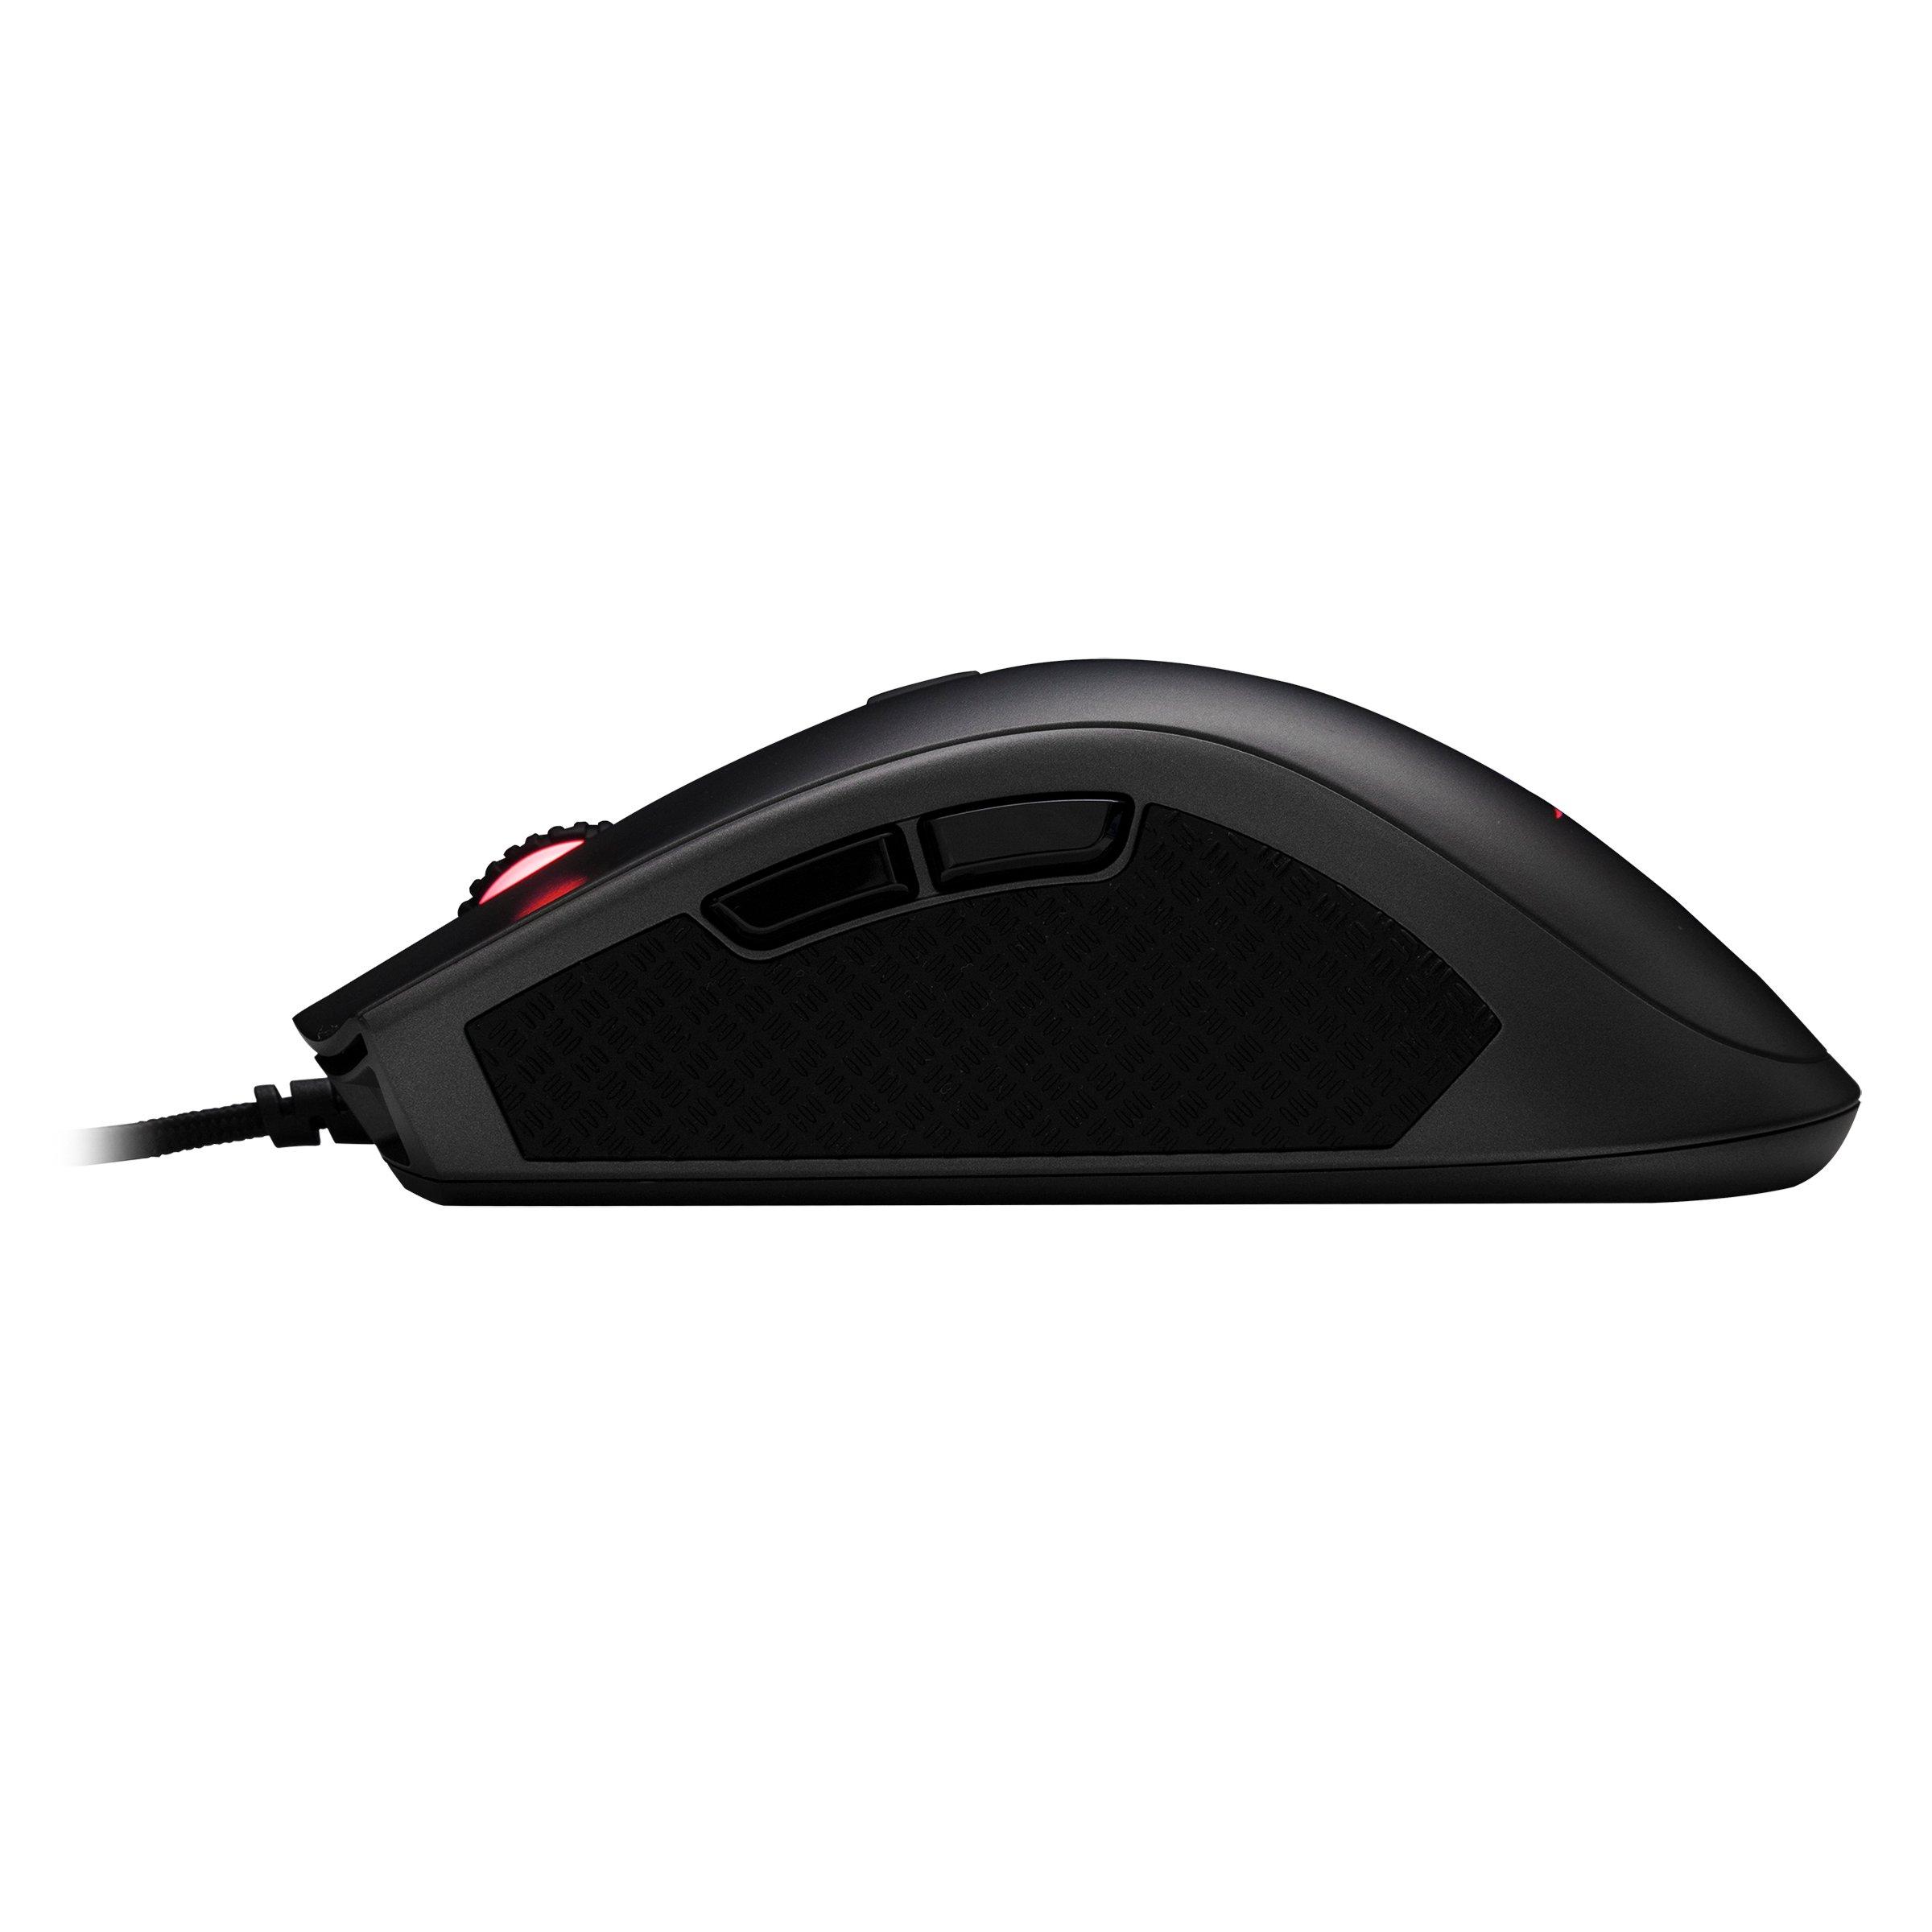 HyperX Pulsefire FPS Pro RGB Wired Gaming Mouse